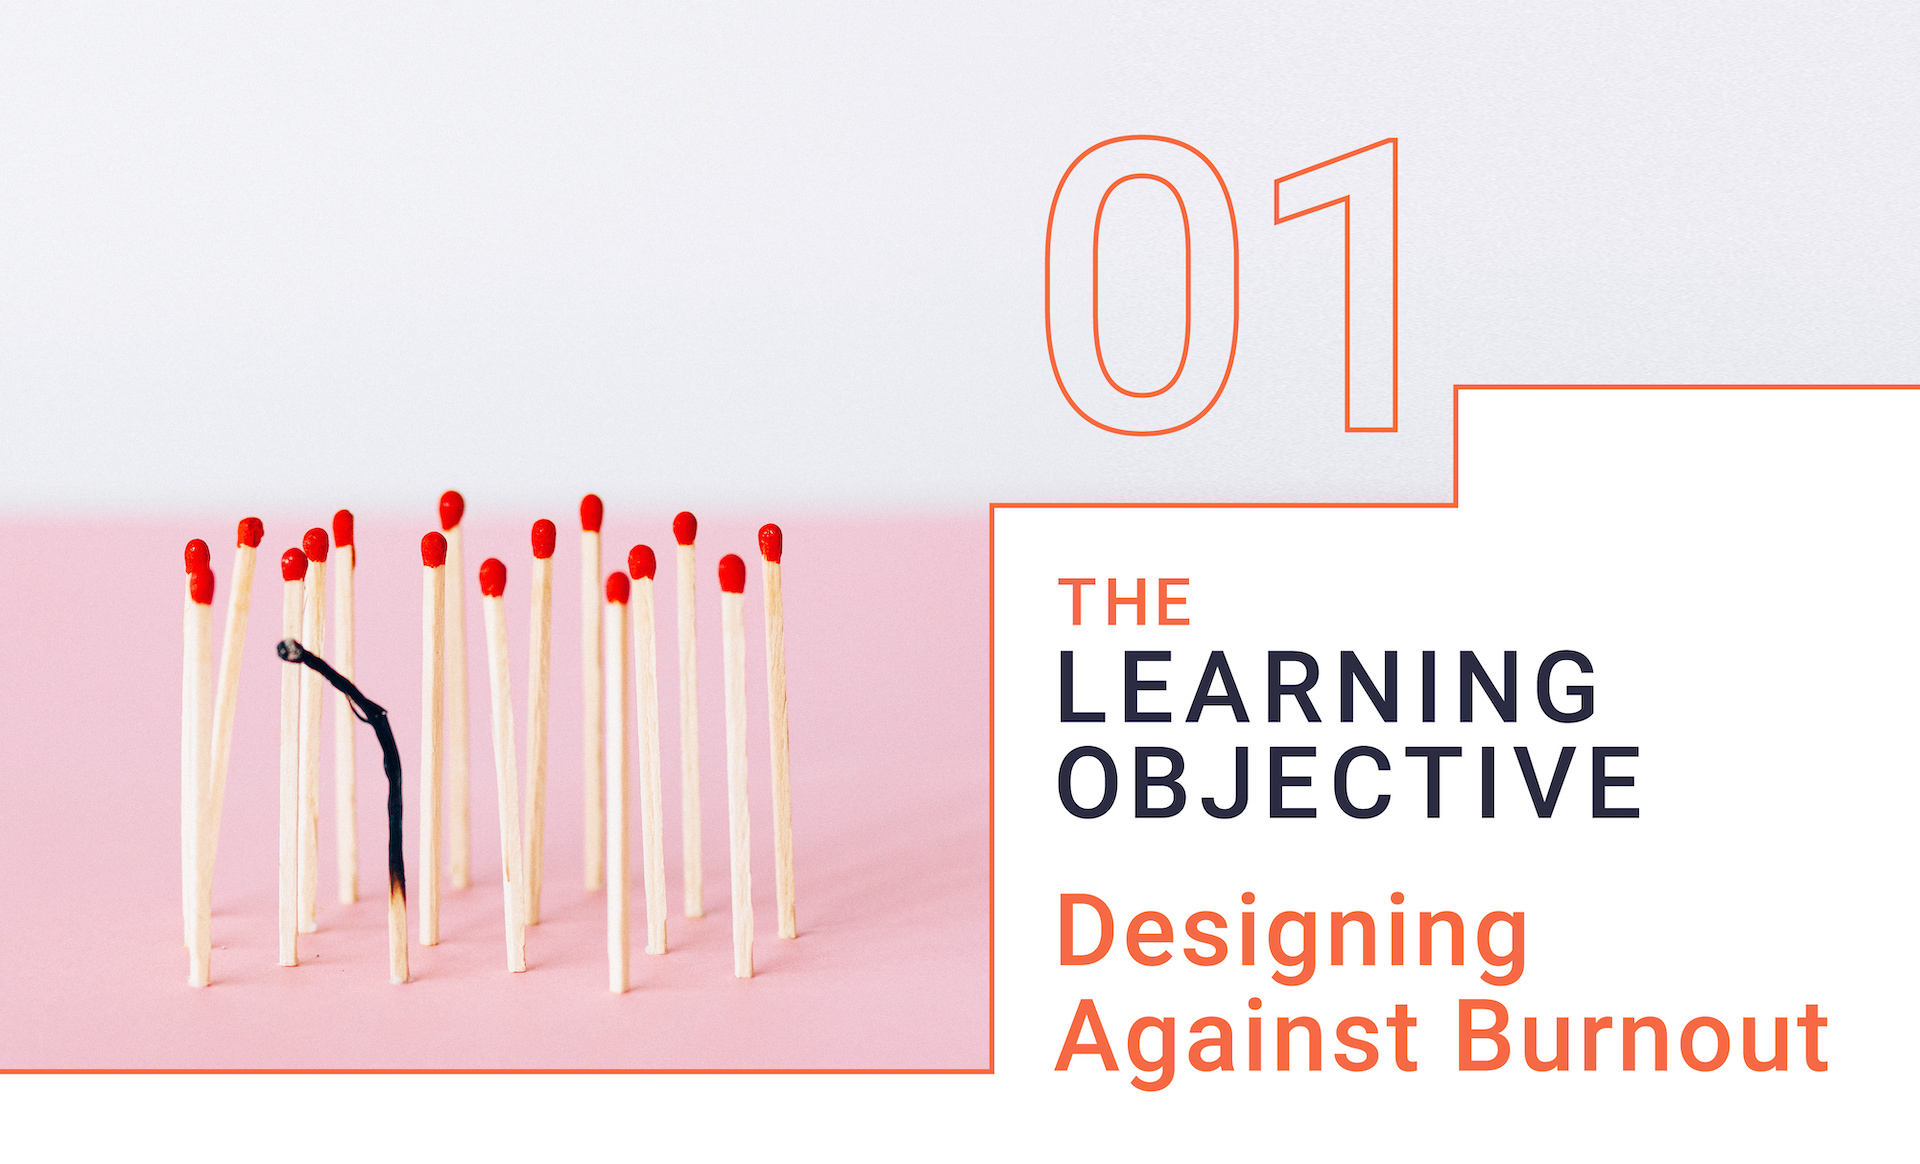 The learning objective CEU Podcast episode from ThinkLab on Designing Against Burnout